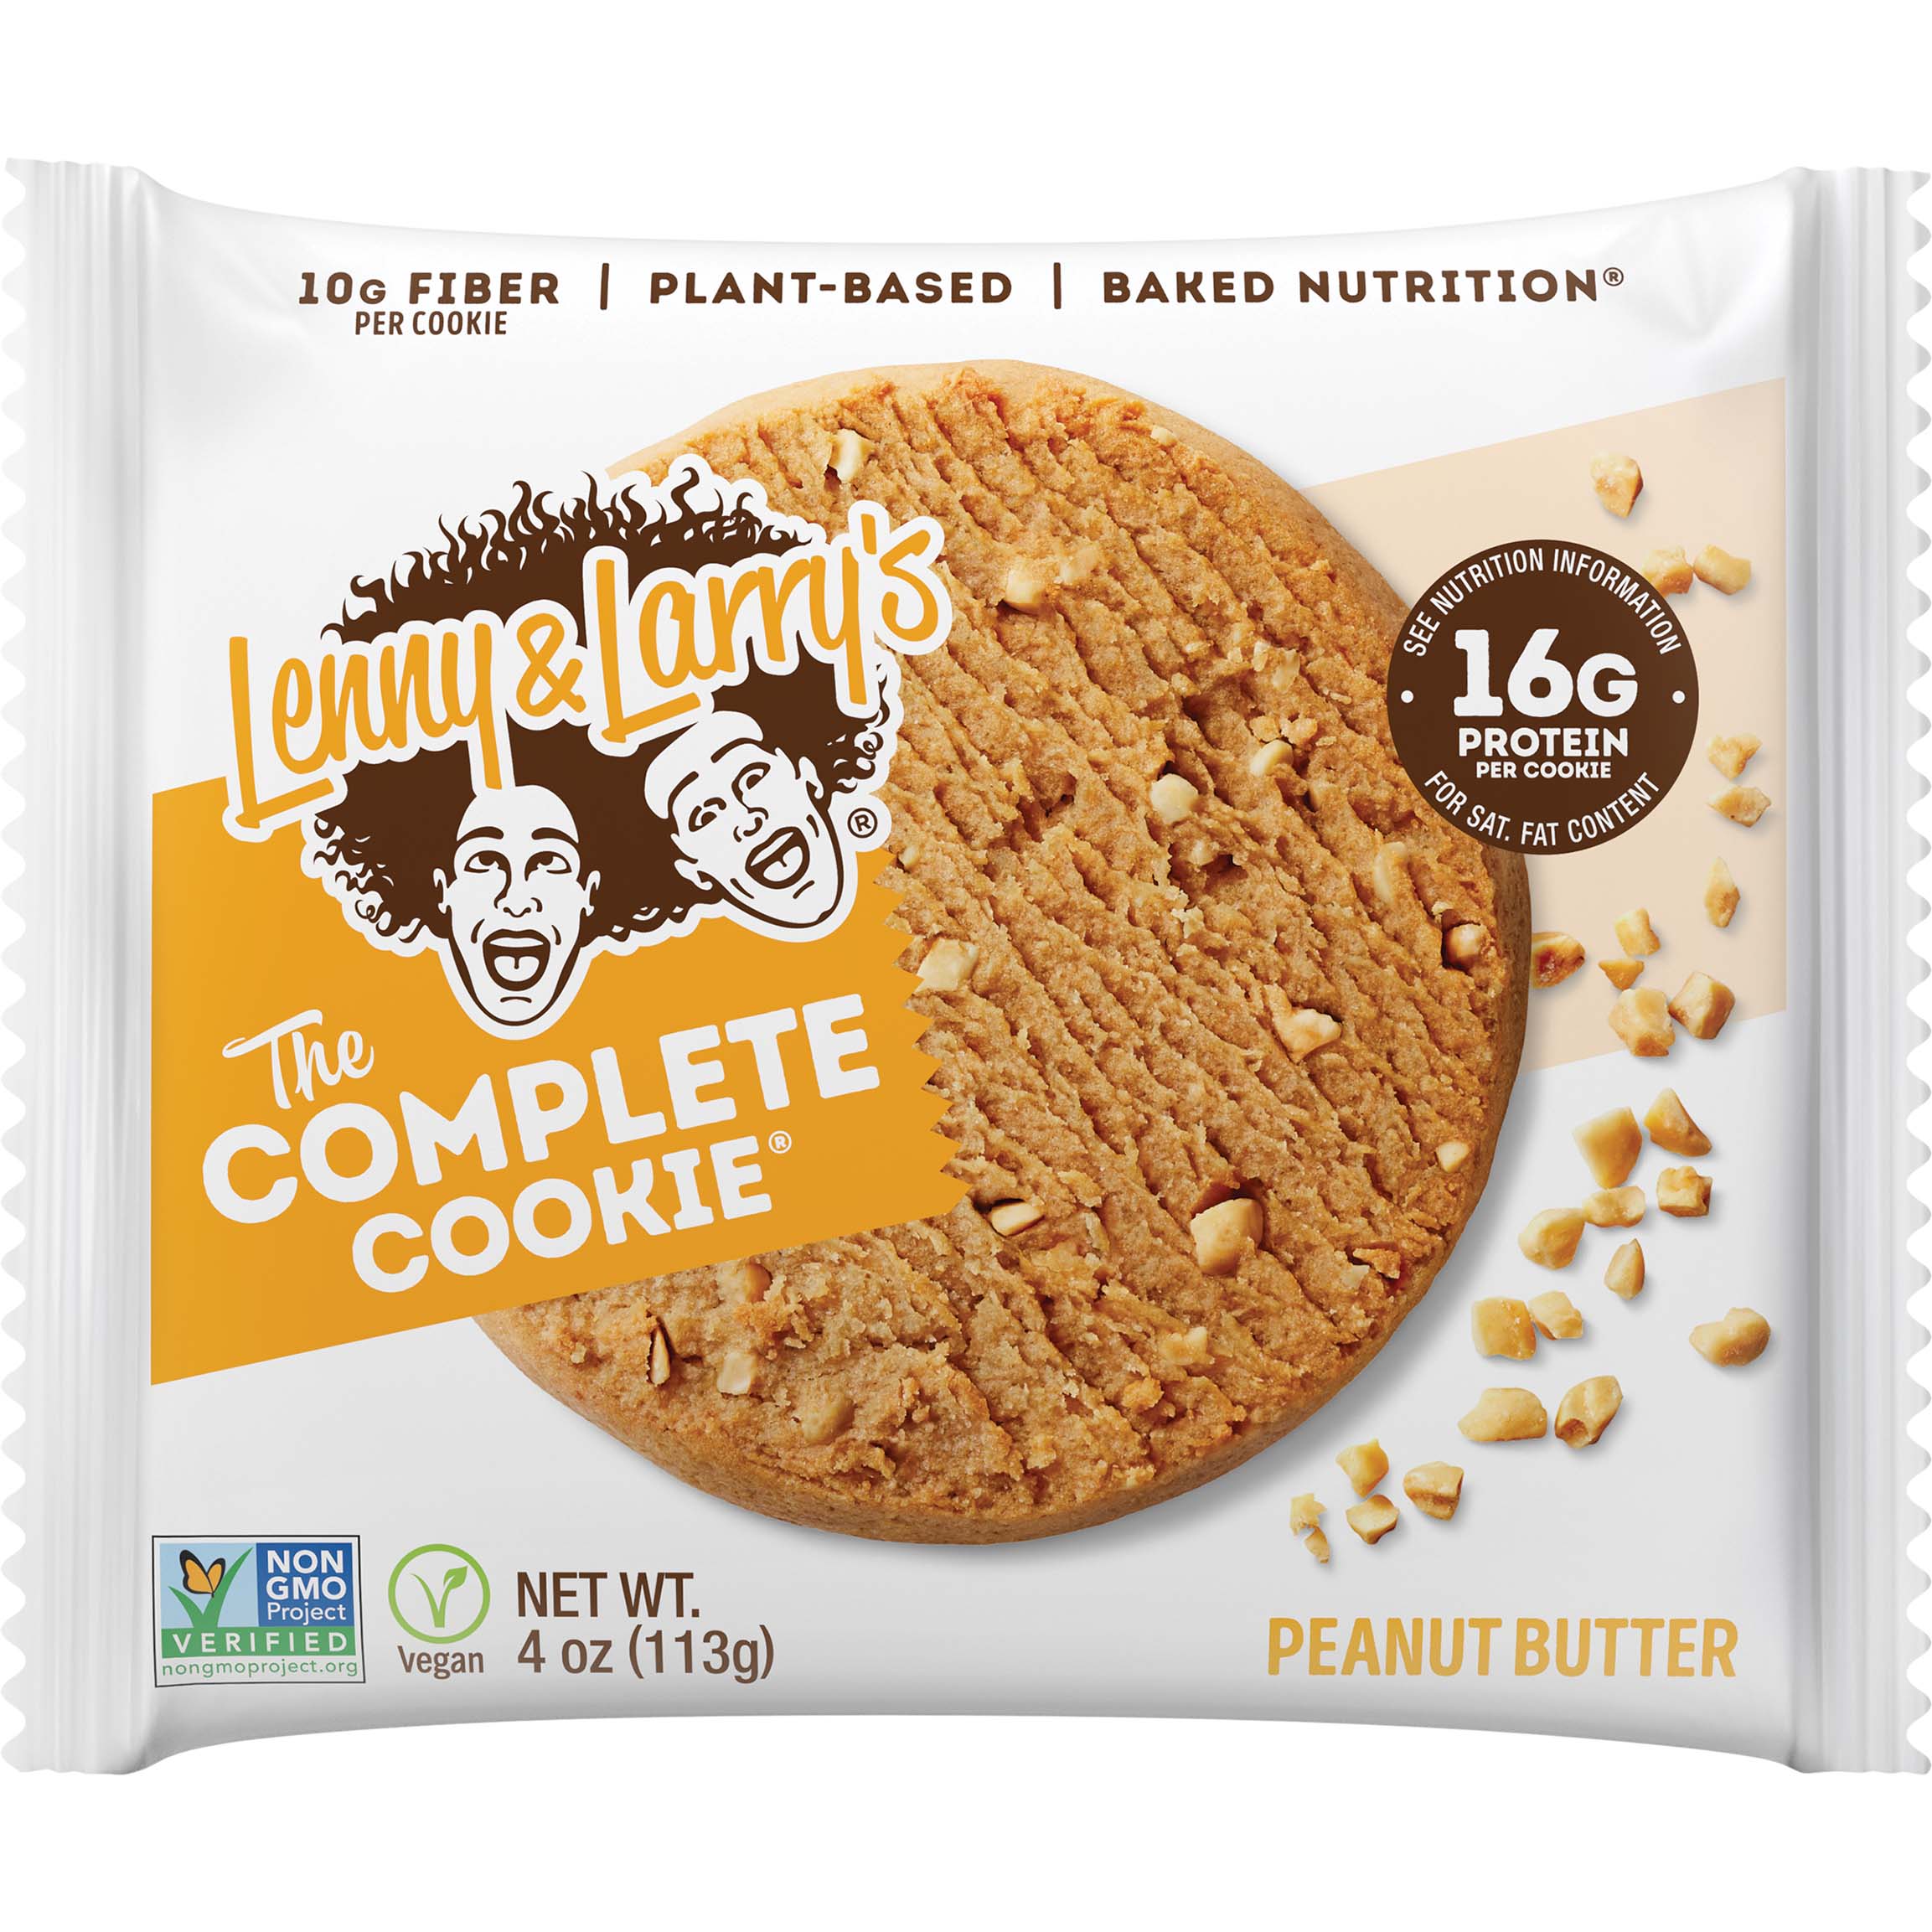 Lenny & Larry’s Complete Cookies 1 Piece Peanut Butter Chocolate